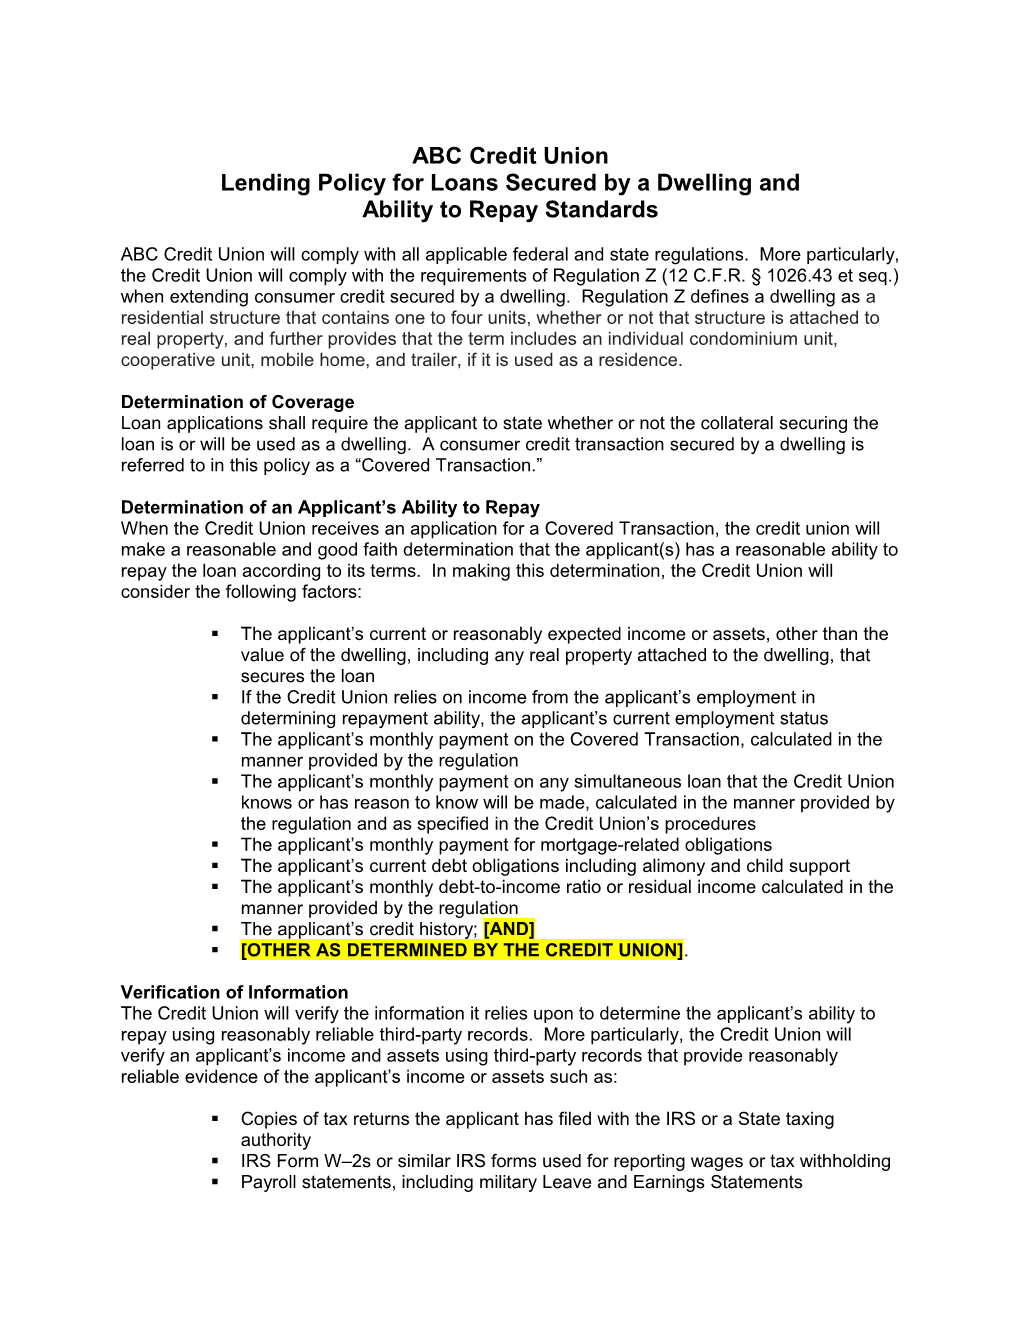 Lending Policy for Loans Secured by a Dwelling And